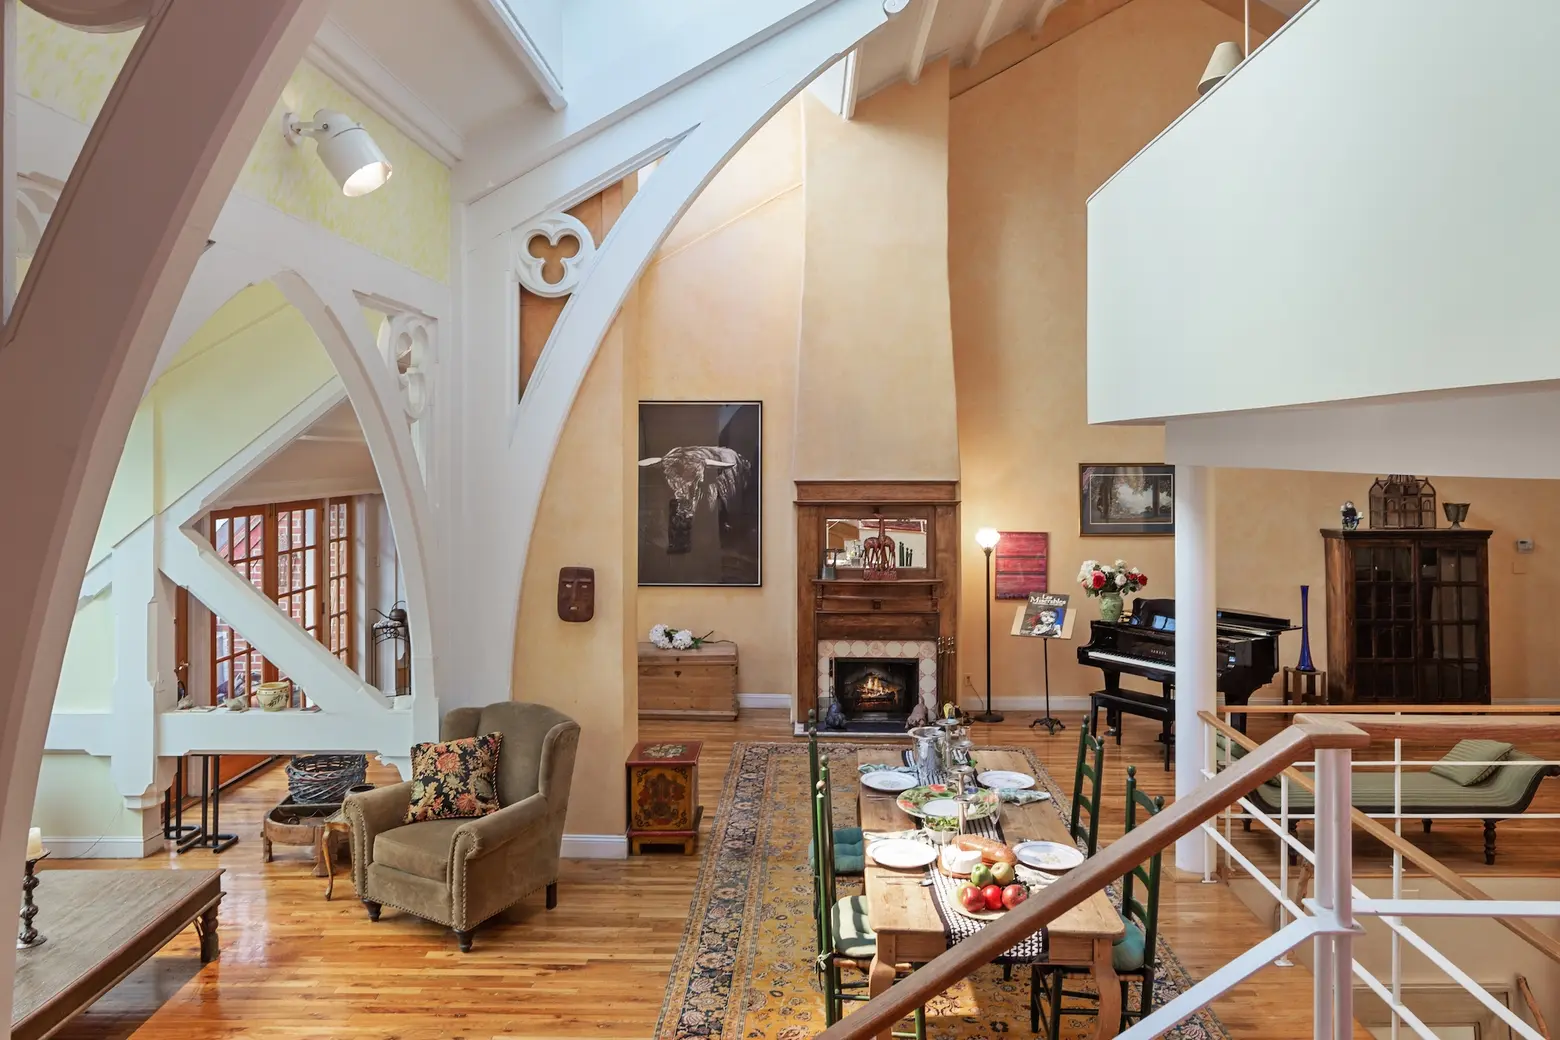 In a former church, $2.75M Brooklyn Heights co-op has cathedral ceilings and stained glass windows